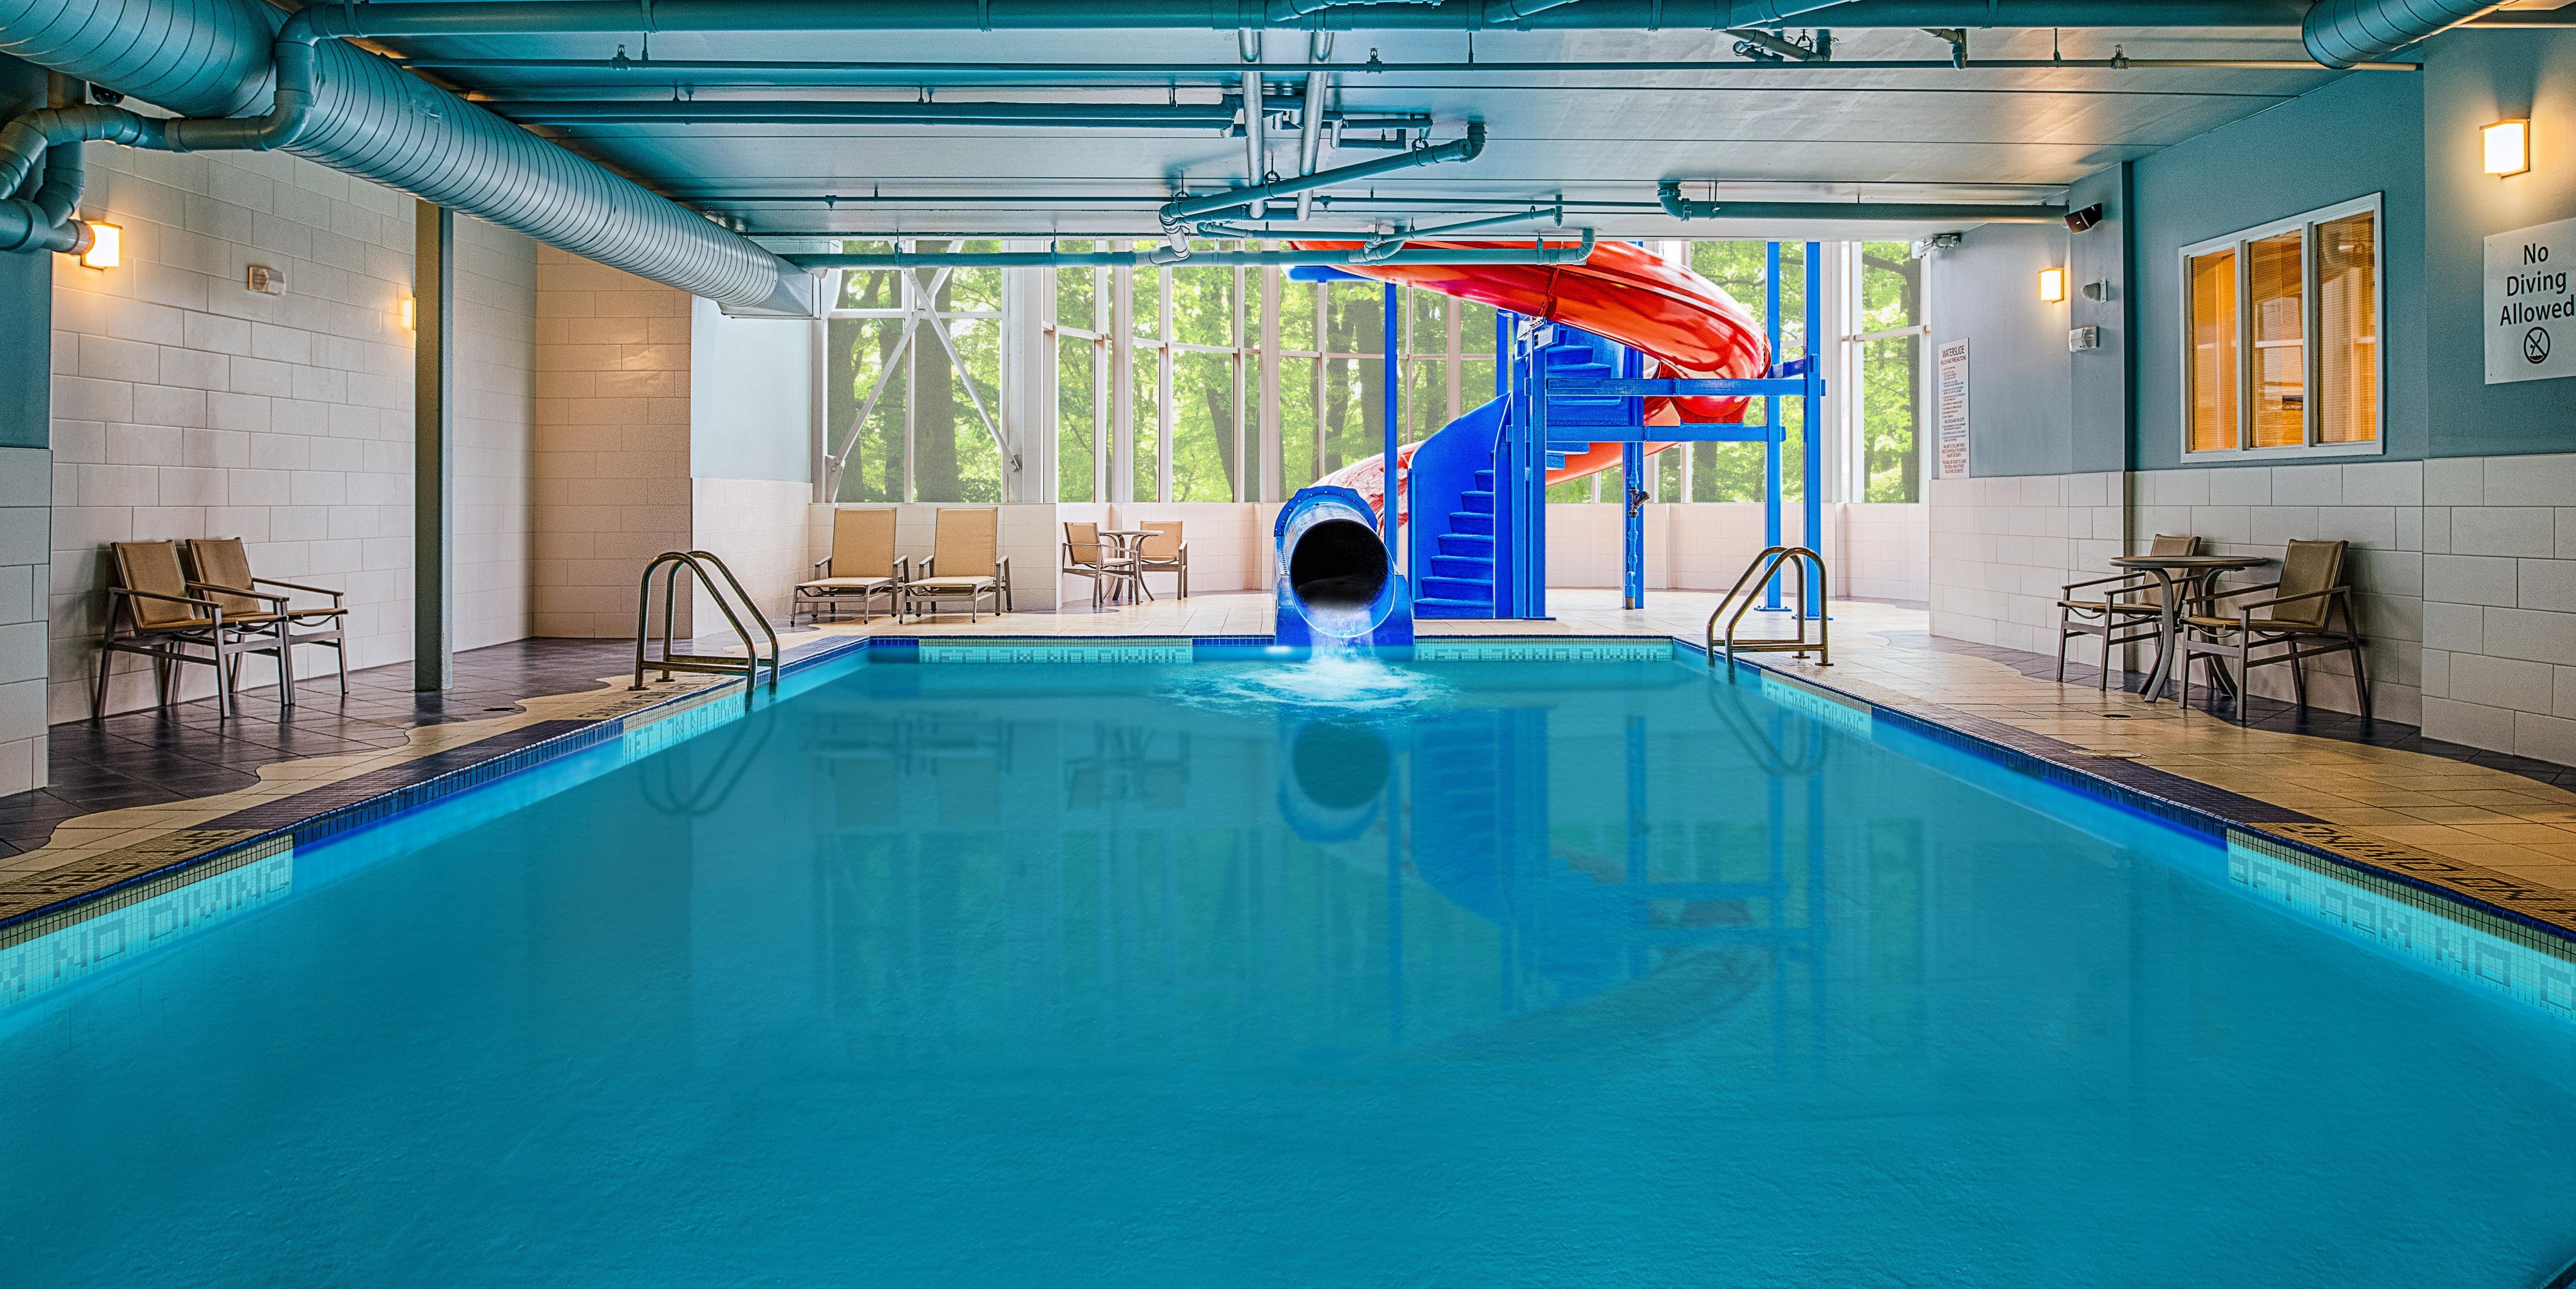 After a day of sightseeing or business meetings in Halifax, enjoy a dip or swim a few laps in our heated indoor pool with a fun waterslide for the kids. Get energized in our Fitness Center with free weights, a treadmill, a stationary bike, an elliptical, and a row machine.